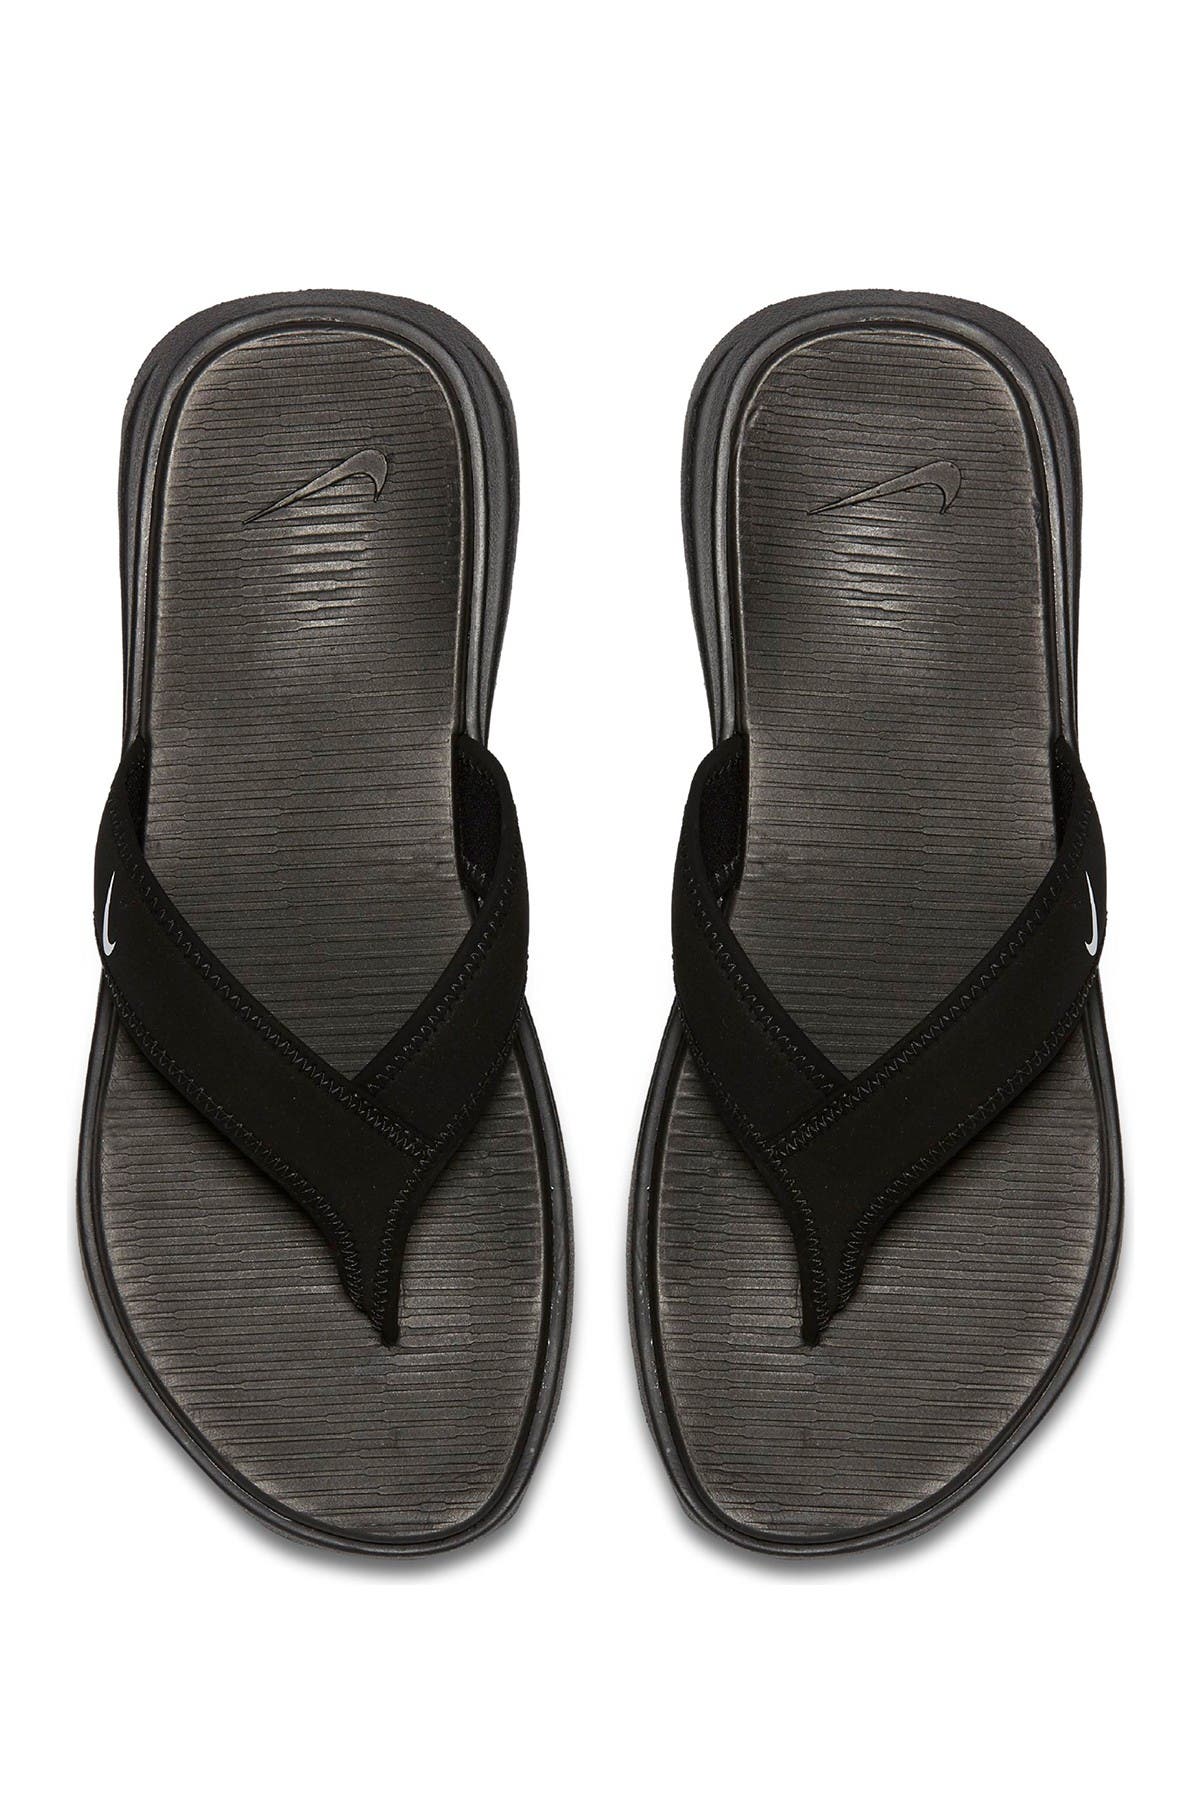 men's ultra celso thong sandals